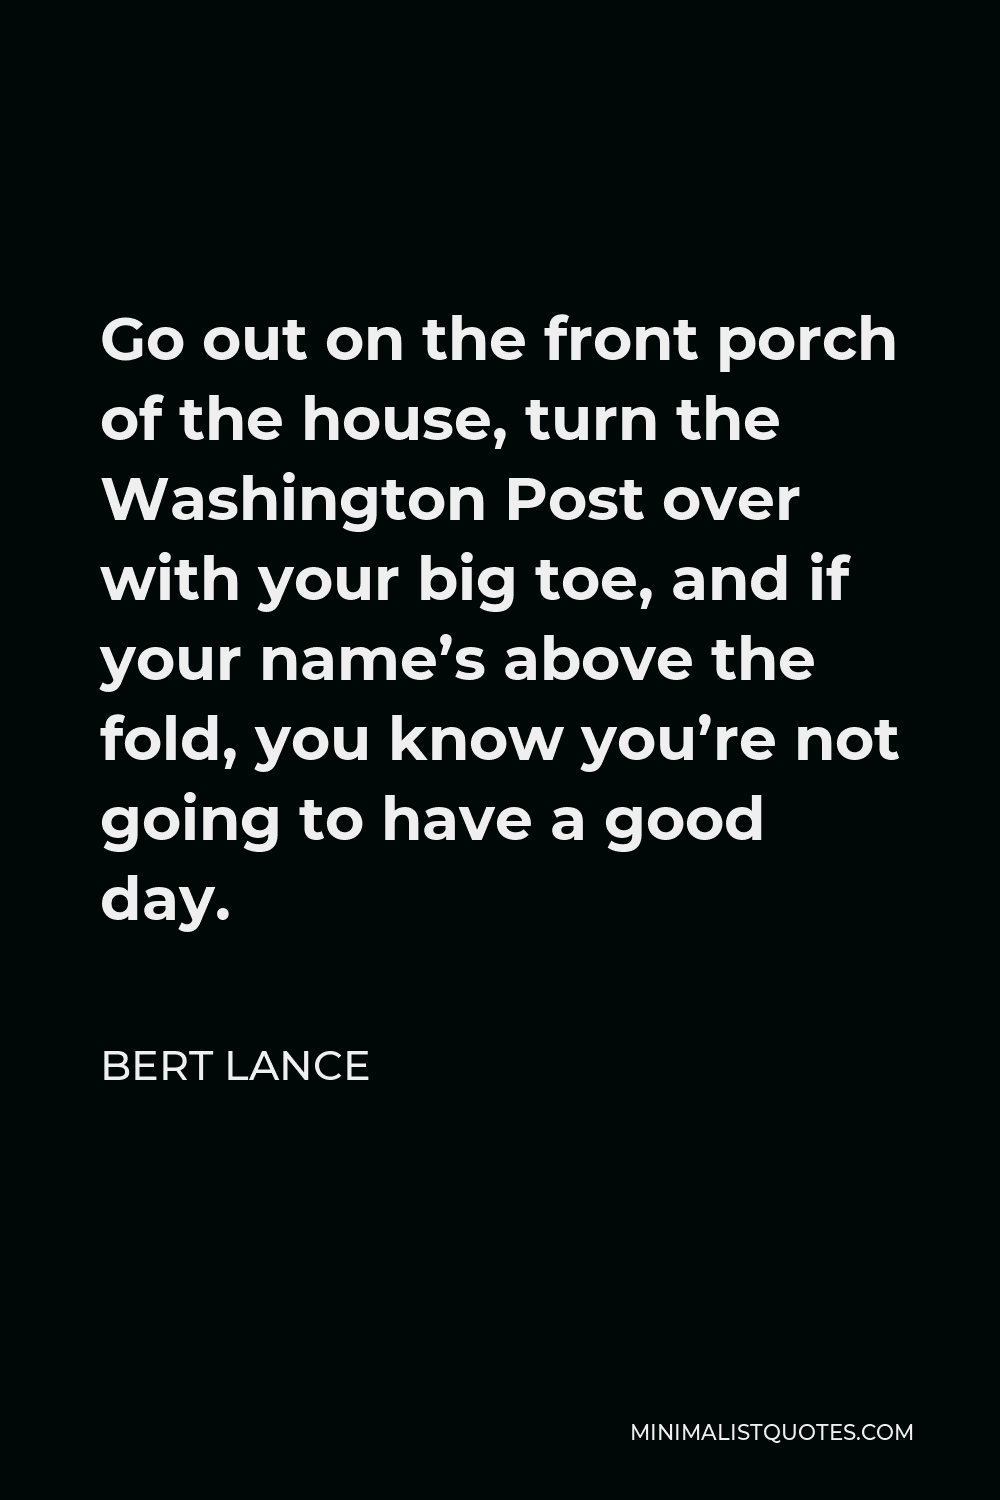 Bert Lance Quote - Go out on the front porch of the house, turn the Washington Post over with your big toe, and if your name’s above the fold, you know you’re not going to have a good day.